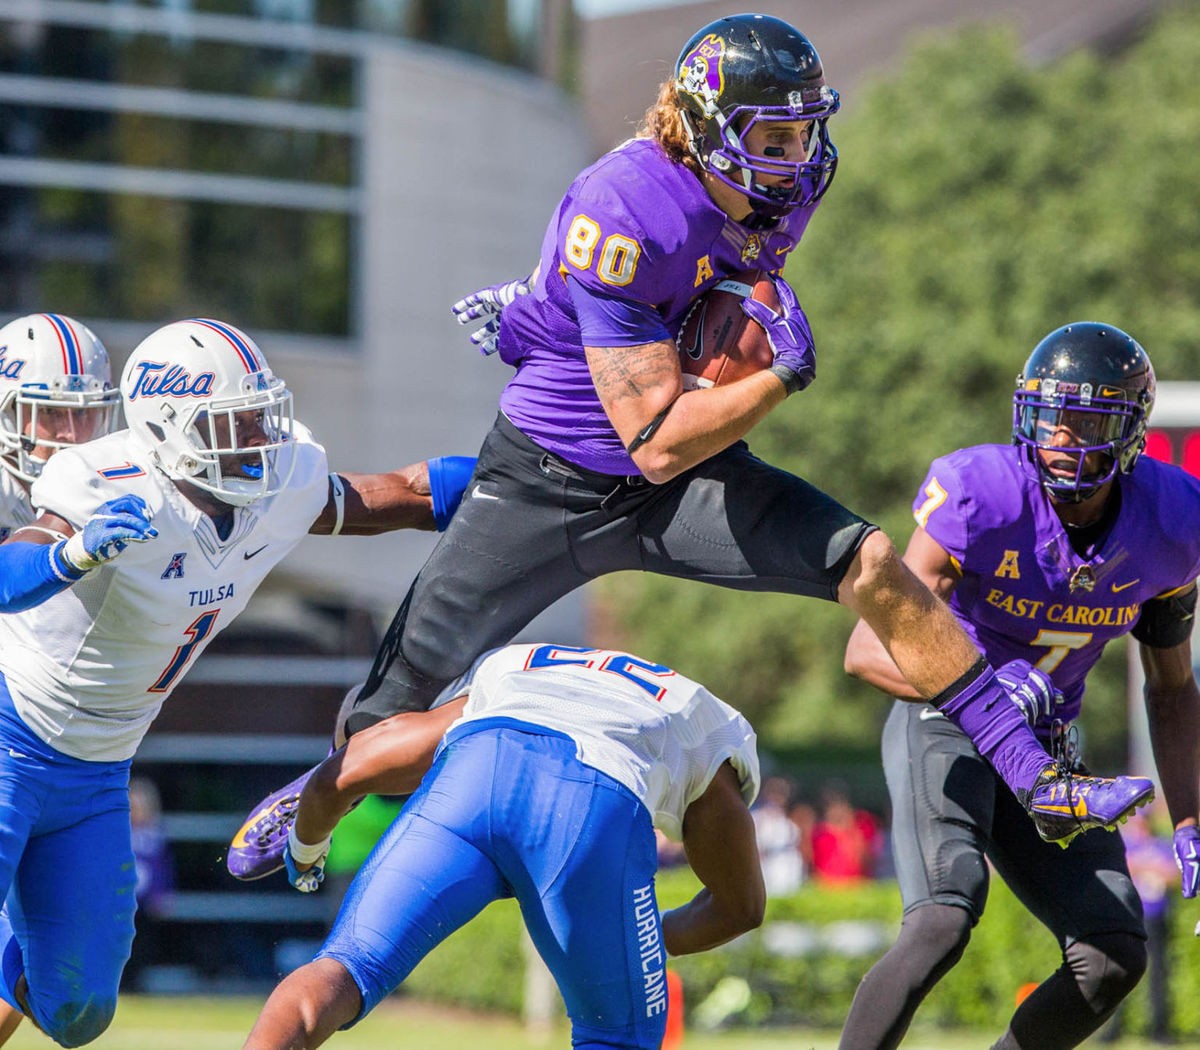 Five True Facts about East Carolina football